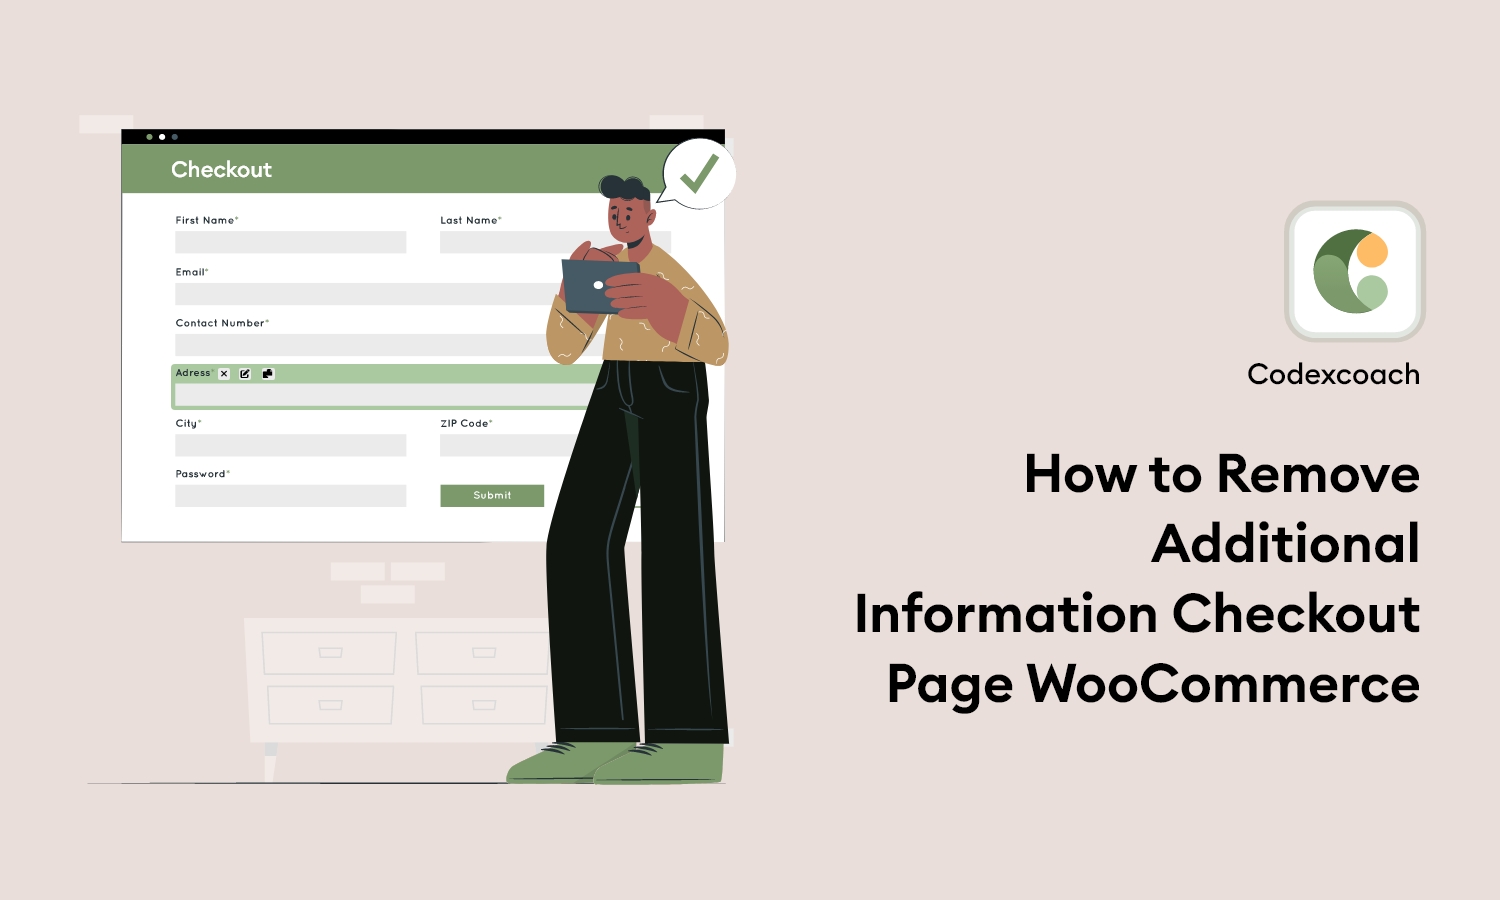 How to Remove Additional Information Checkout Page WooCommerce